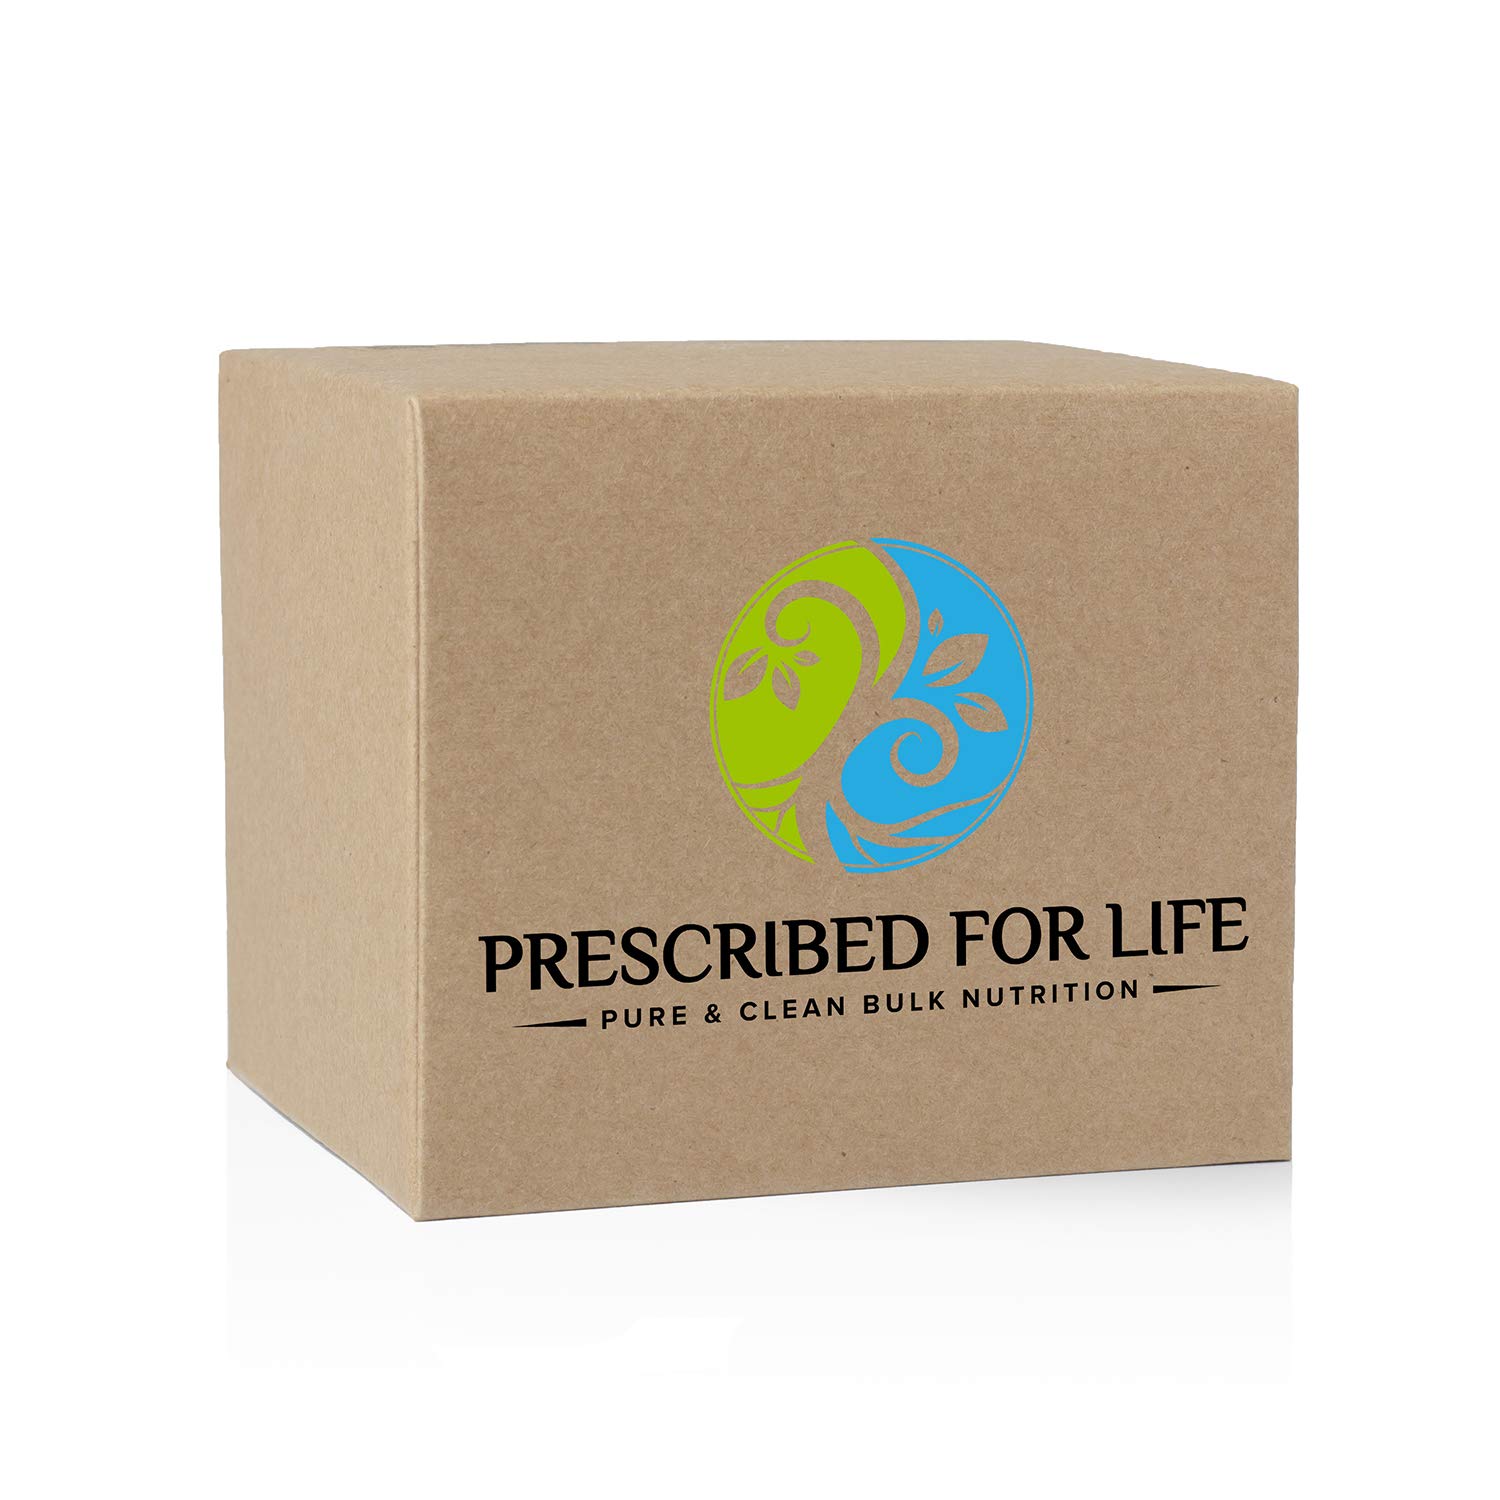 Prescribed For Life Grape Skin Powder 4:1 | Natural Abundant Source of Antioxidants and Polyphenols | Unbleached, Gluten Free, Vegan, Non-GMO, Soy Free, Kosher, No Fillers (10 kg)